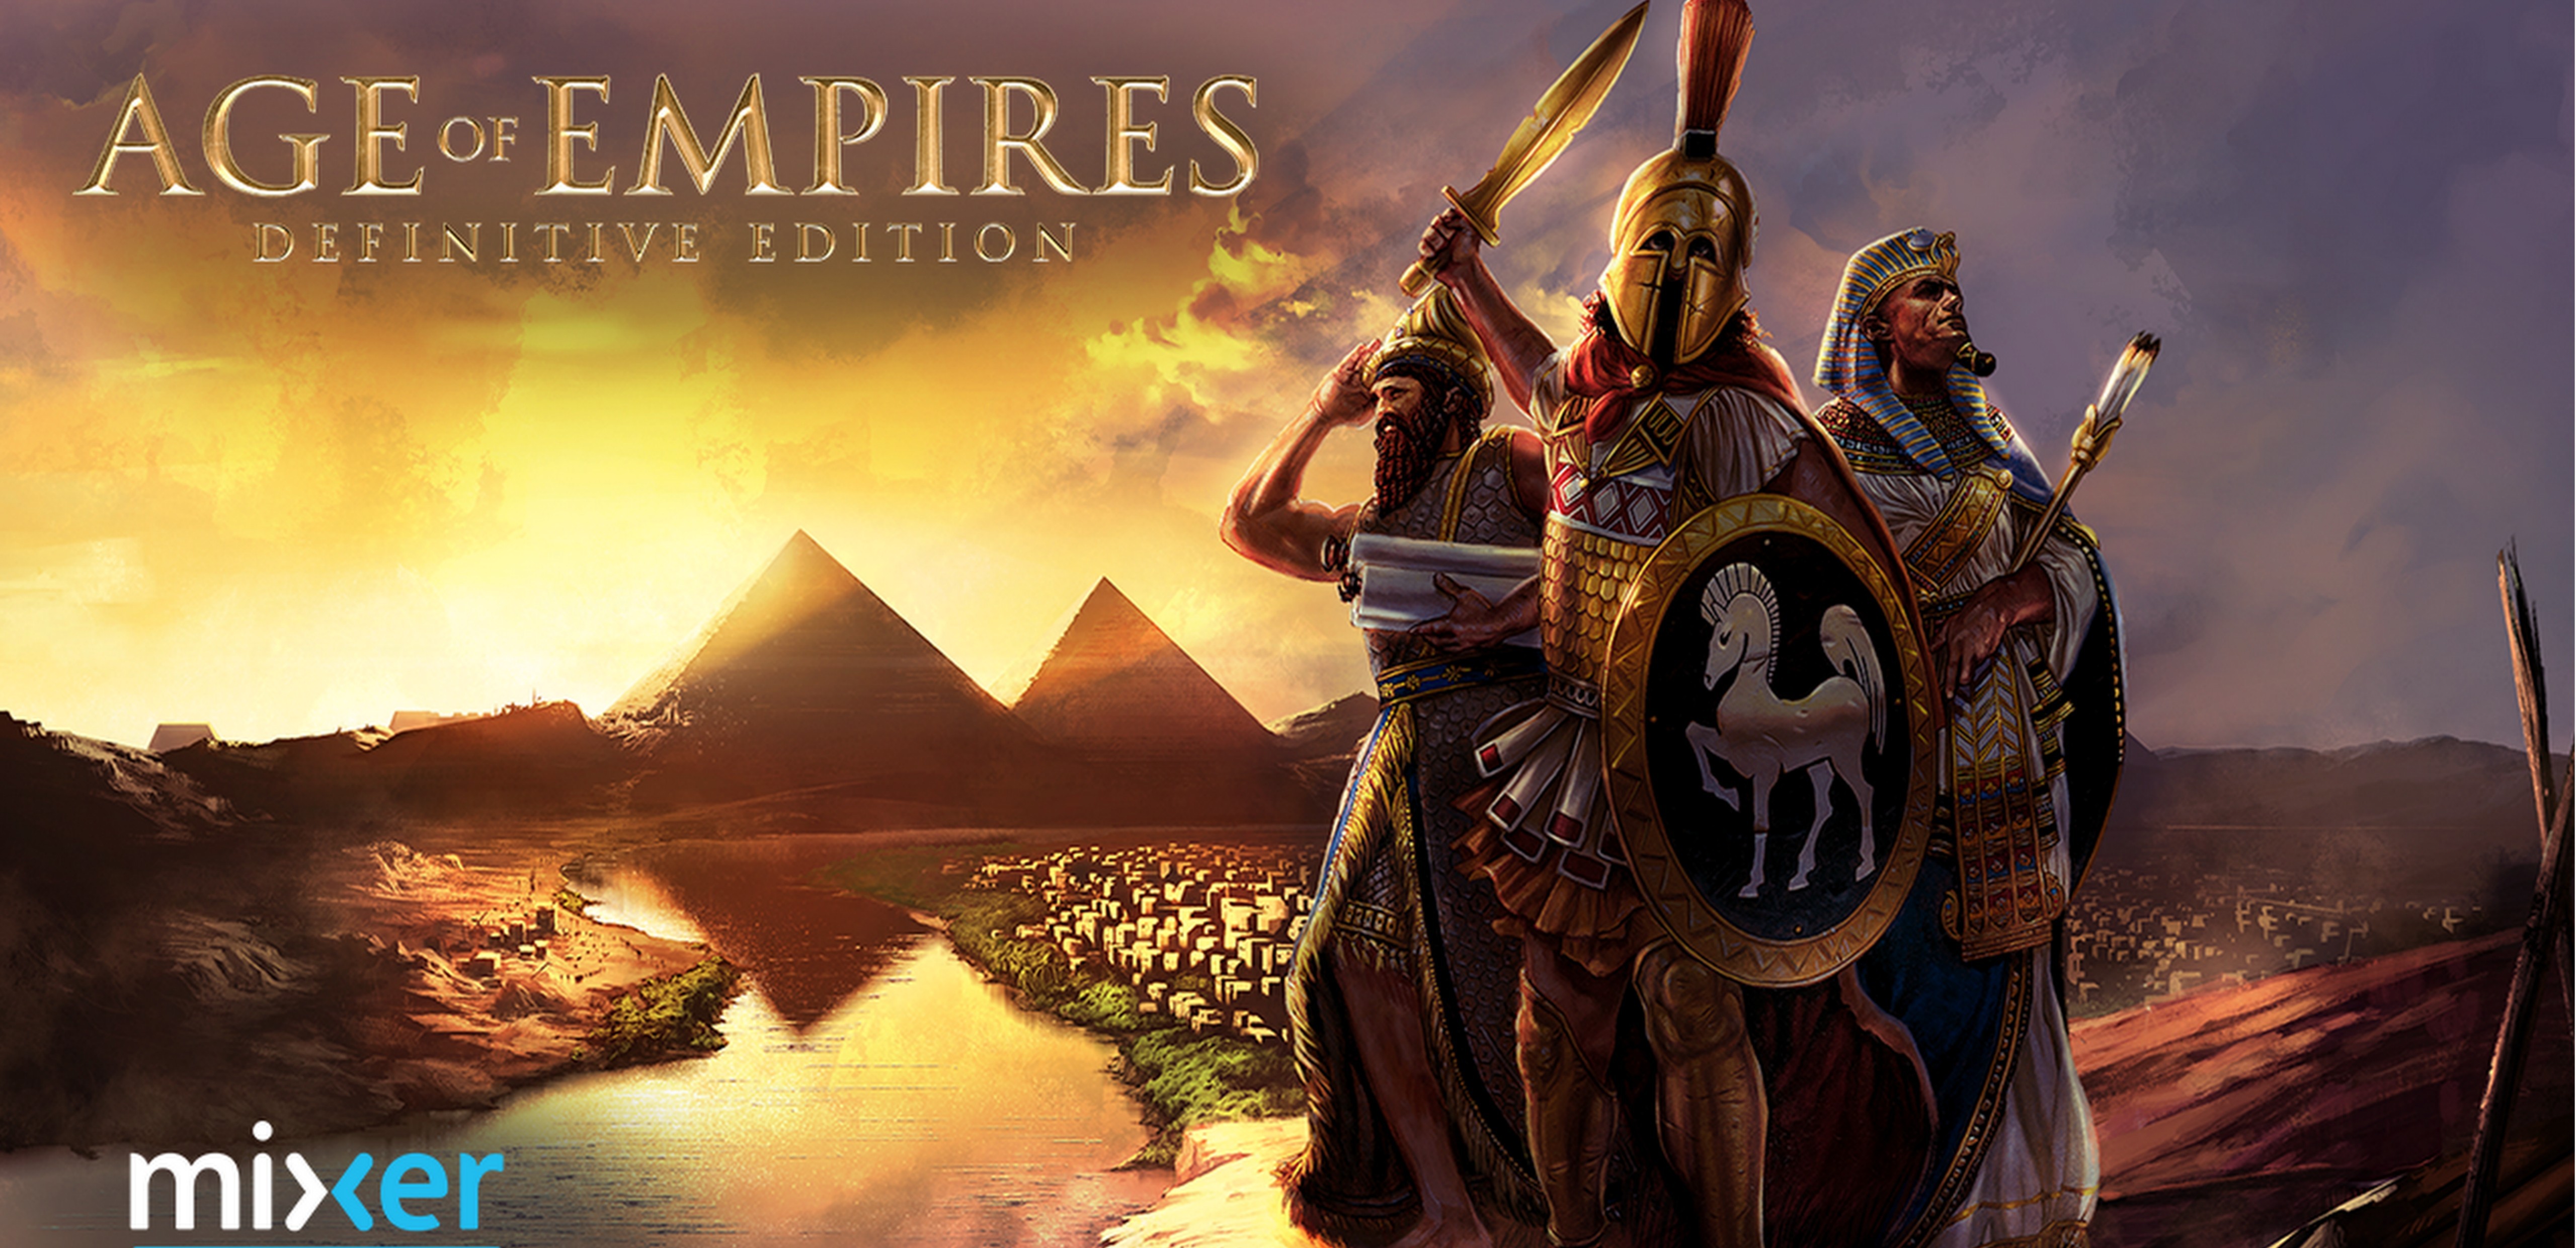 age of empires hd download